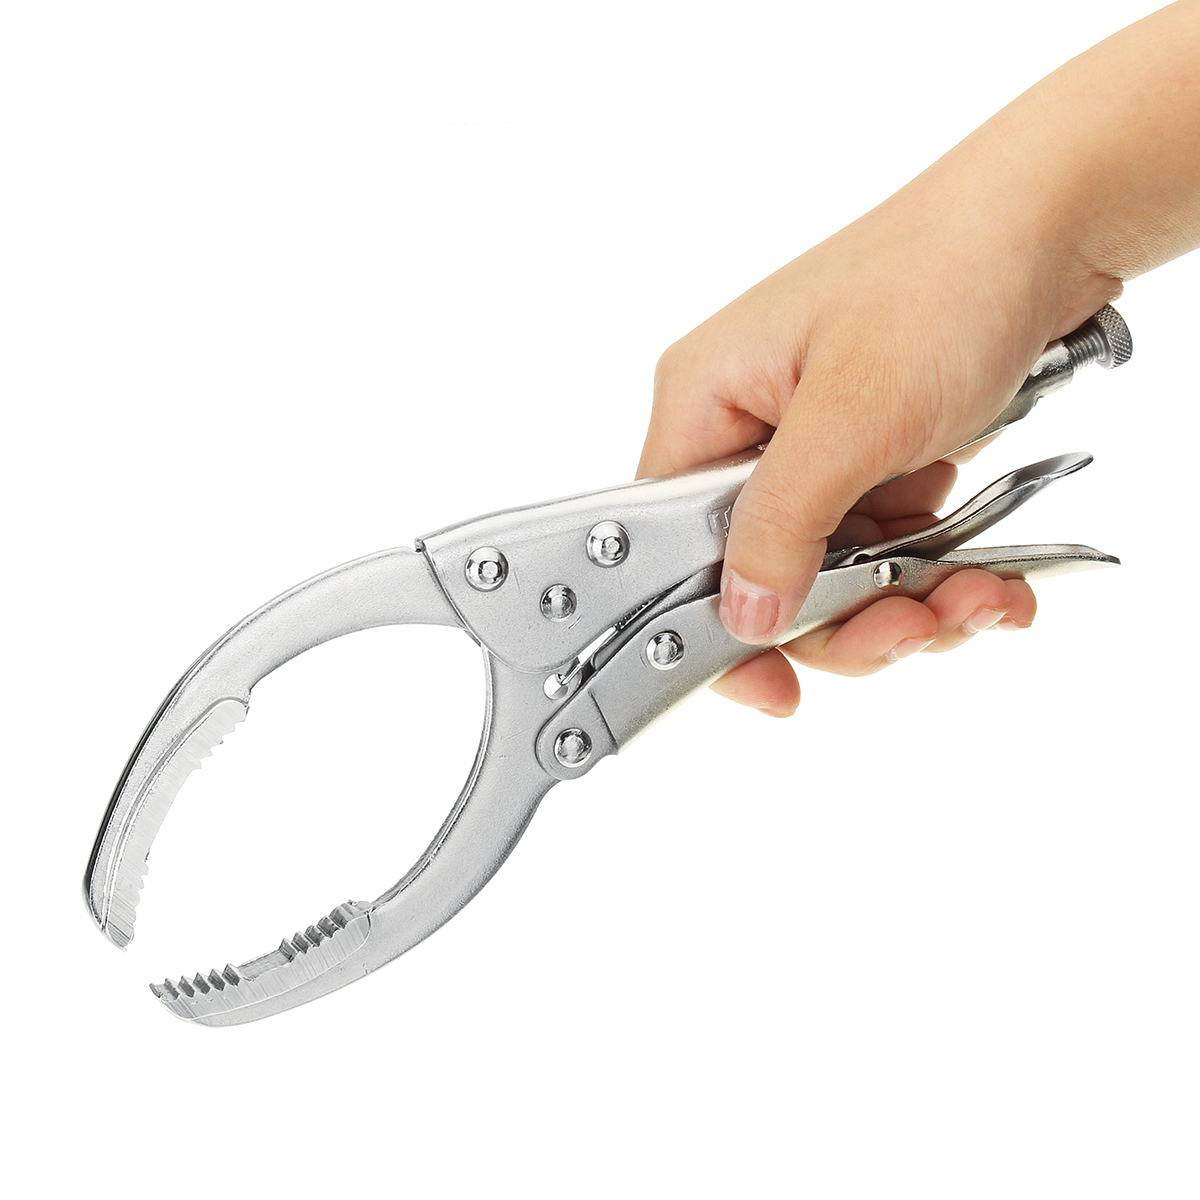 Self-Grip-Oil-Filter-Removal-Tool-Wrench-Pliers-Multi-Purpose-Hand-Remover-Tool-1446280-8